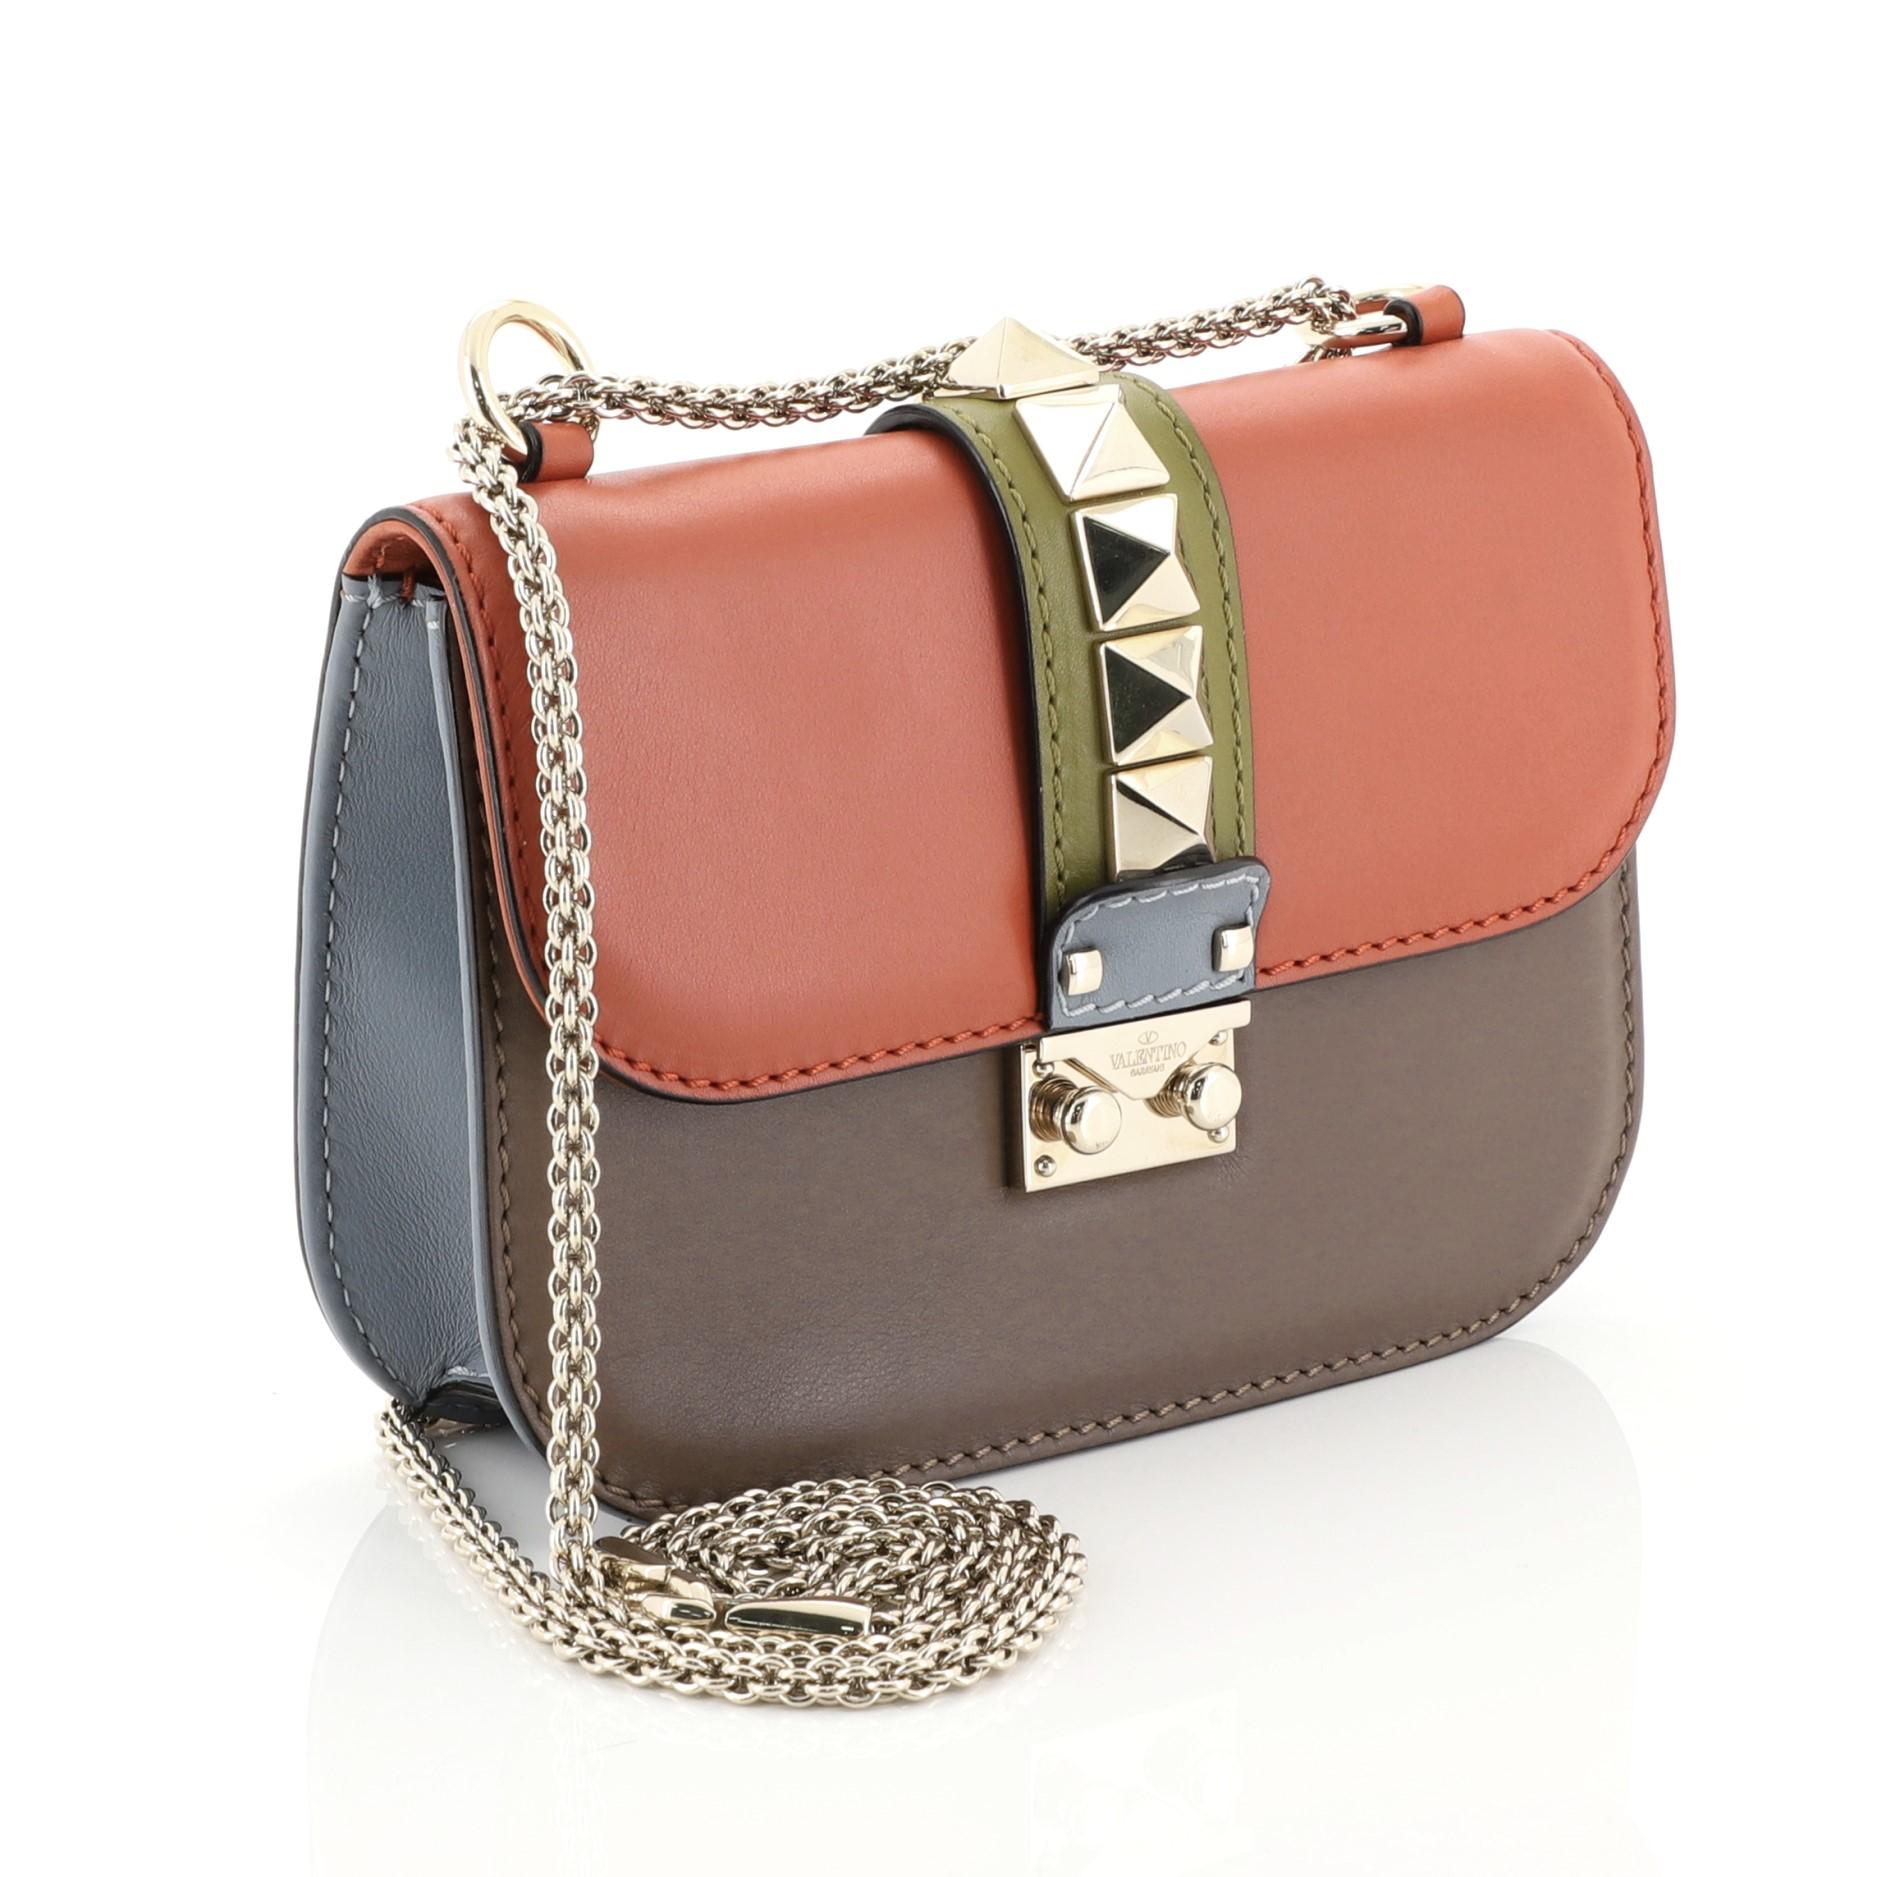 This Valentino Glam Lock Shoulder Bag Leather Small, crafted in multicolor leather, features a chain link strap, pyramid studs, and gold-tone hardware. Its push-lock closure opens to a neutral fabric interior with zip and slip pockets. 

Estimated